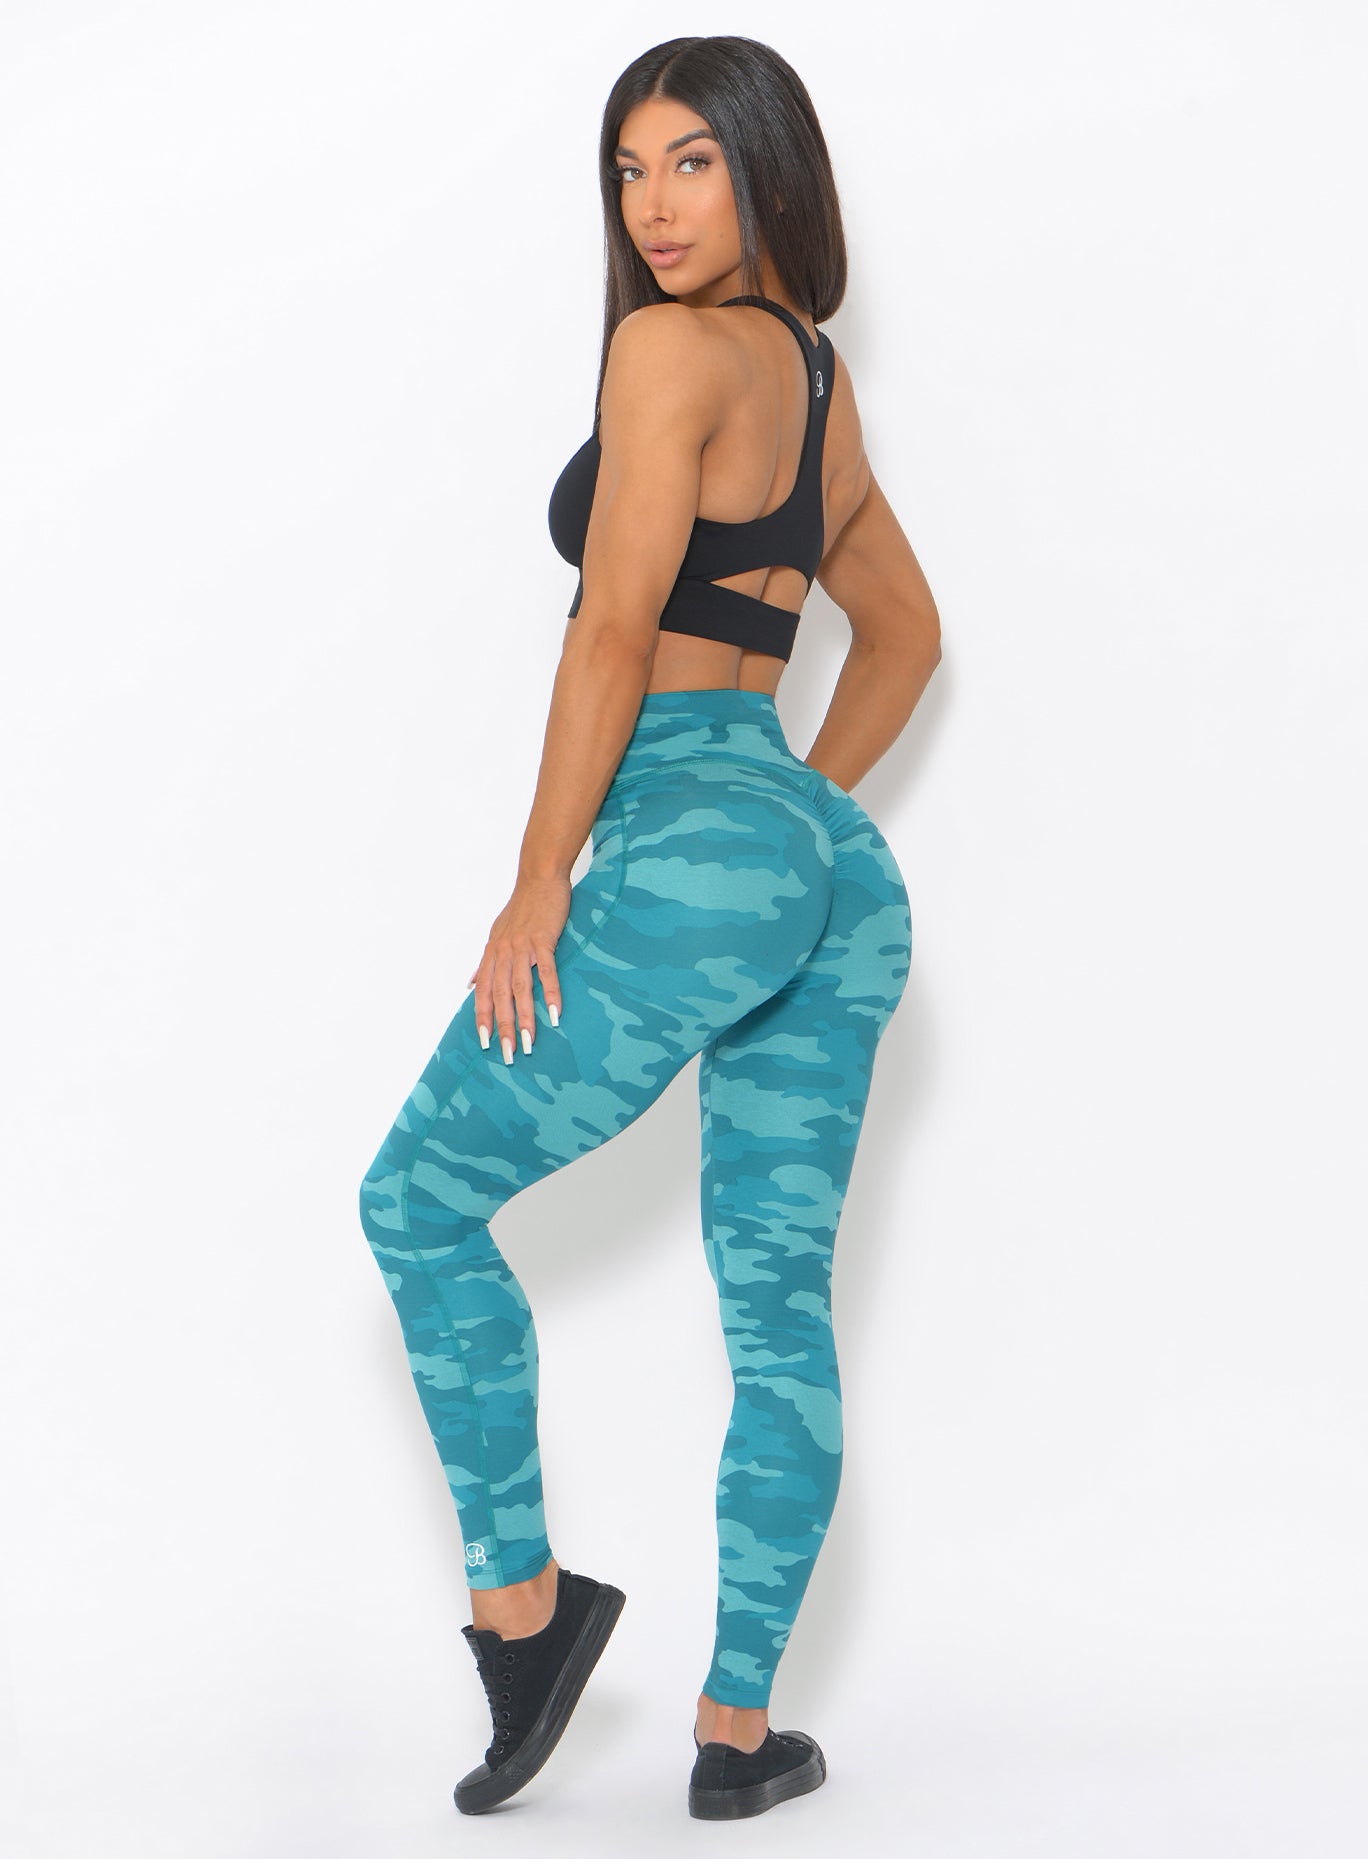 Left side view of the model wearing our fit camo leggings in teal color and a black sports bra